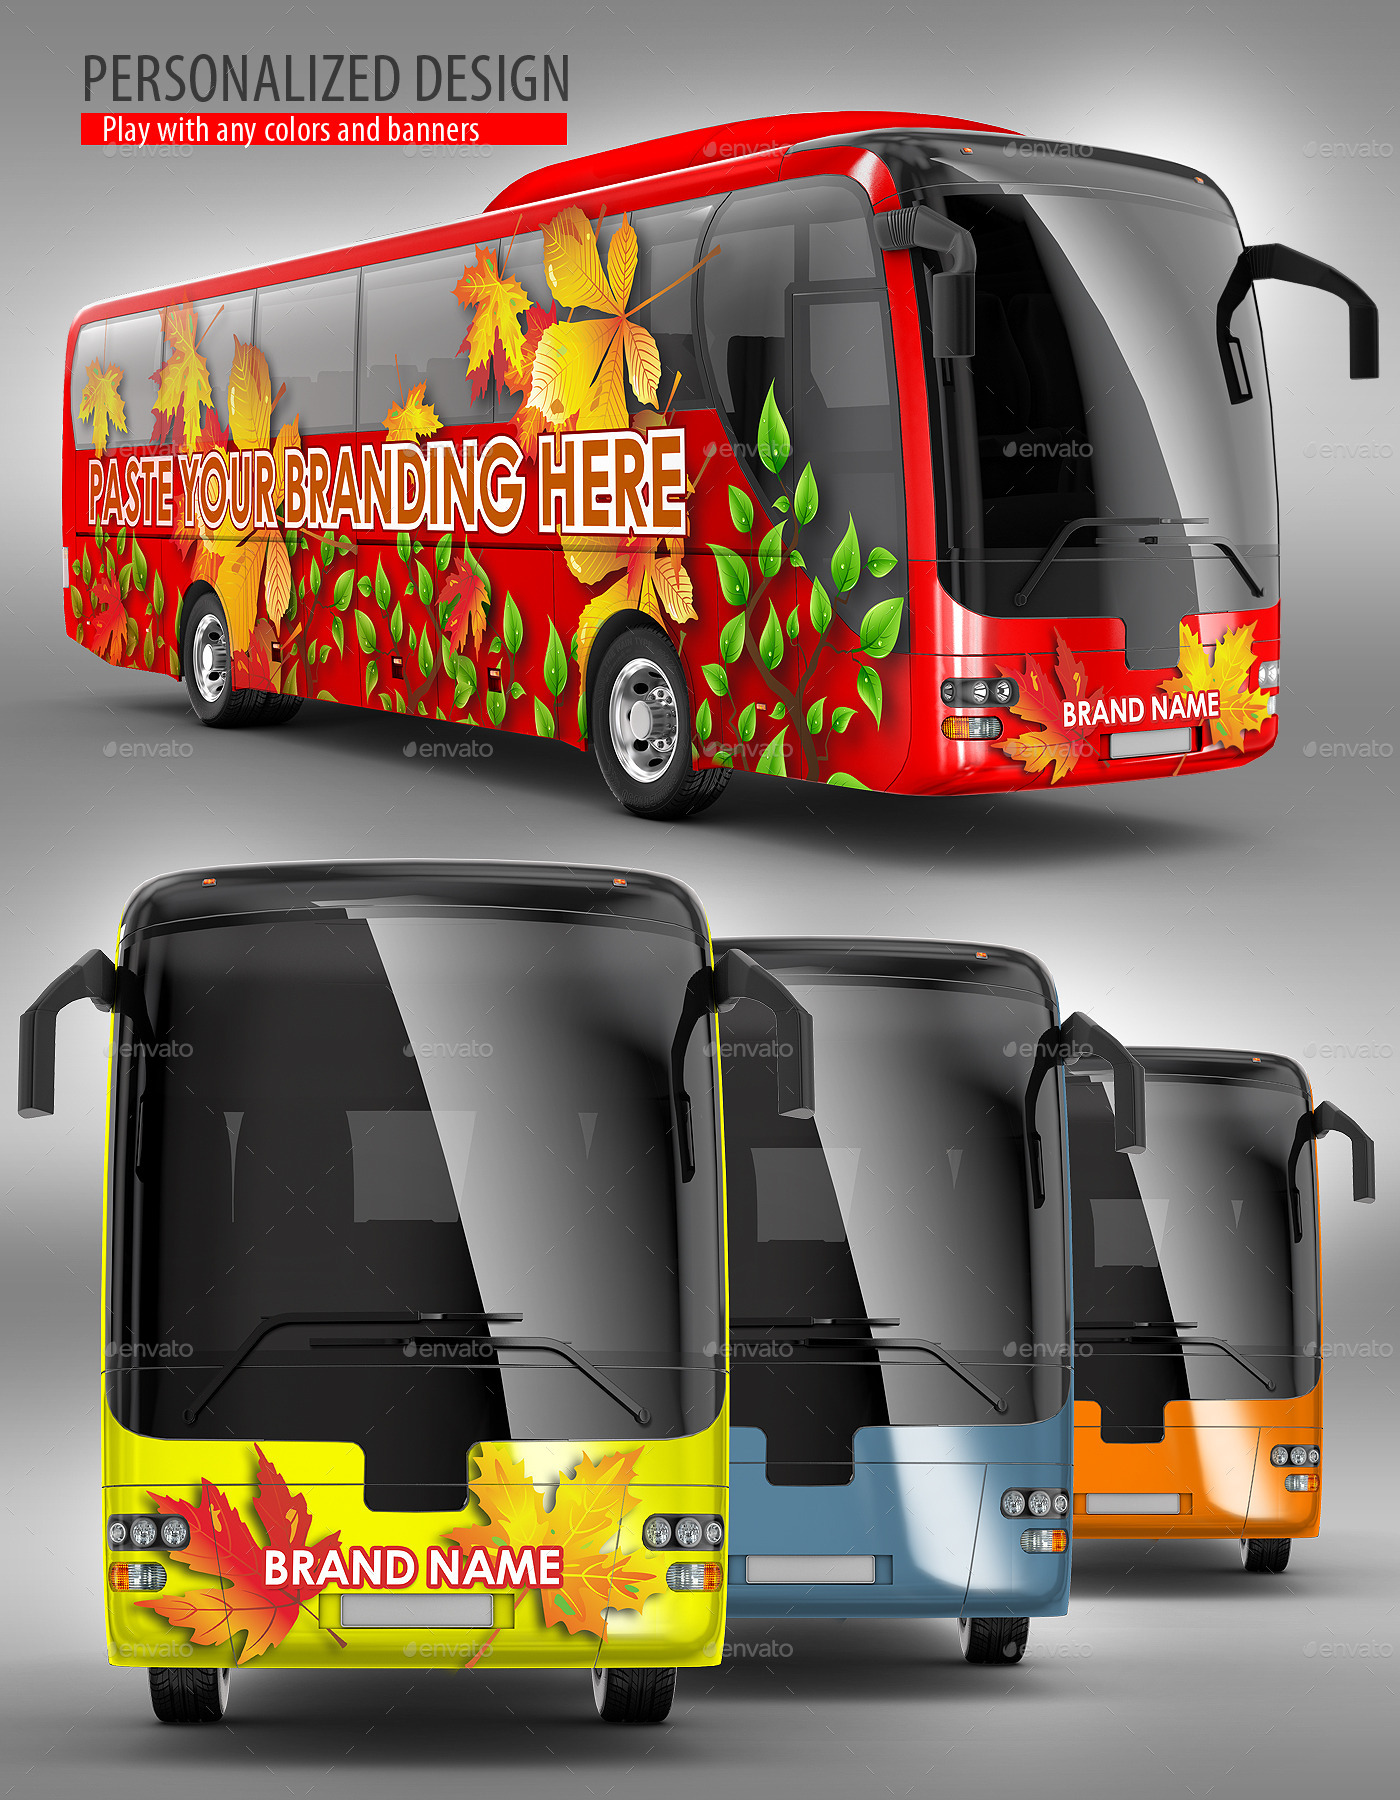 Download 12+ Best Bus Mockup PSD For Bus Advertising - PSD ...